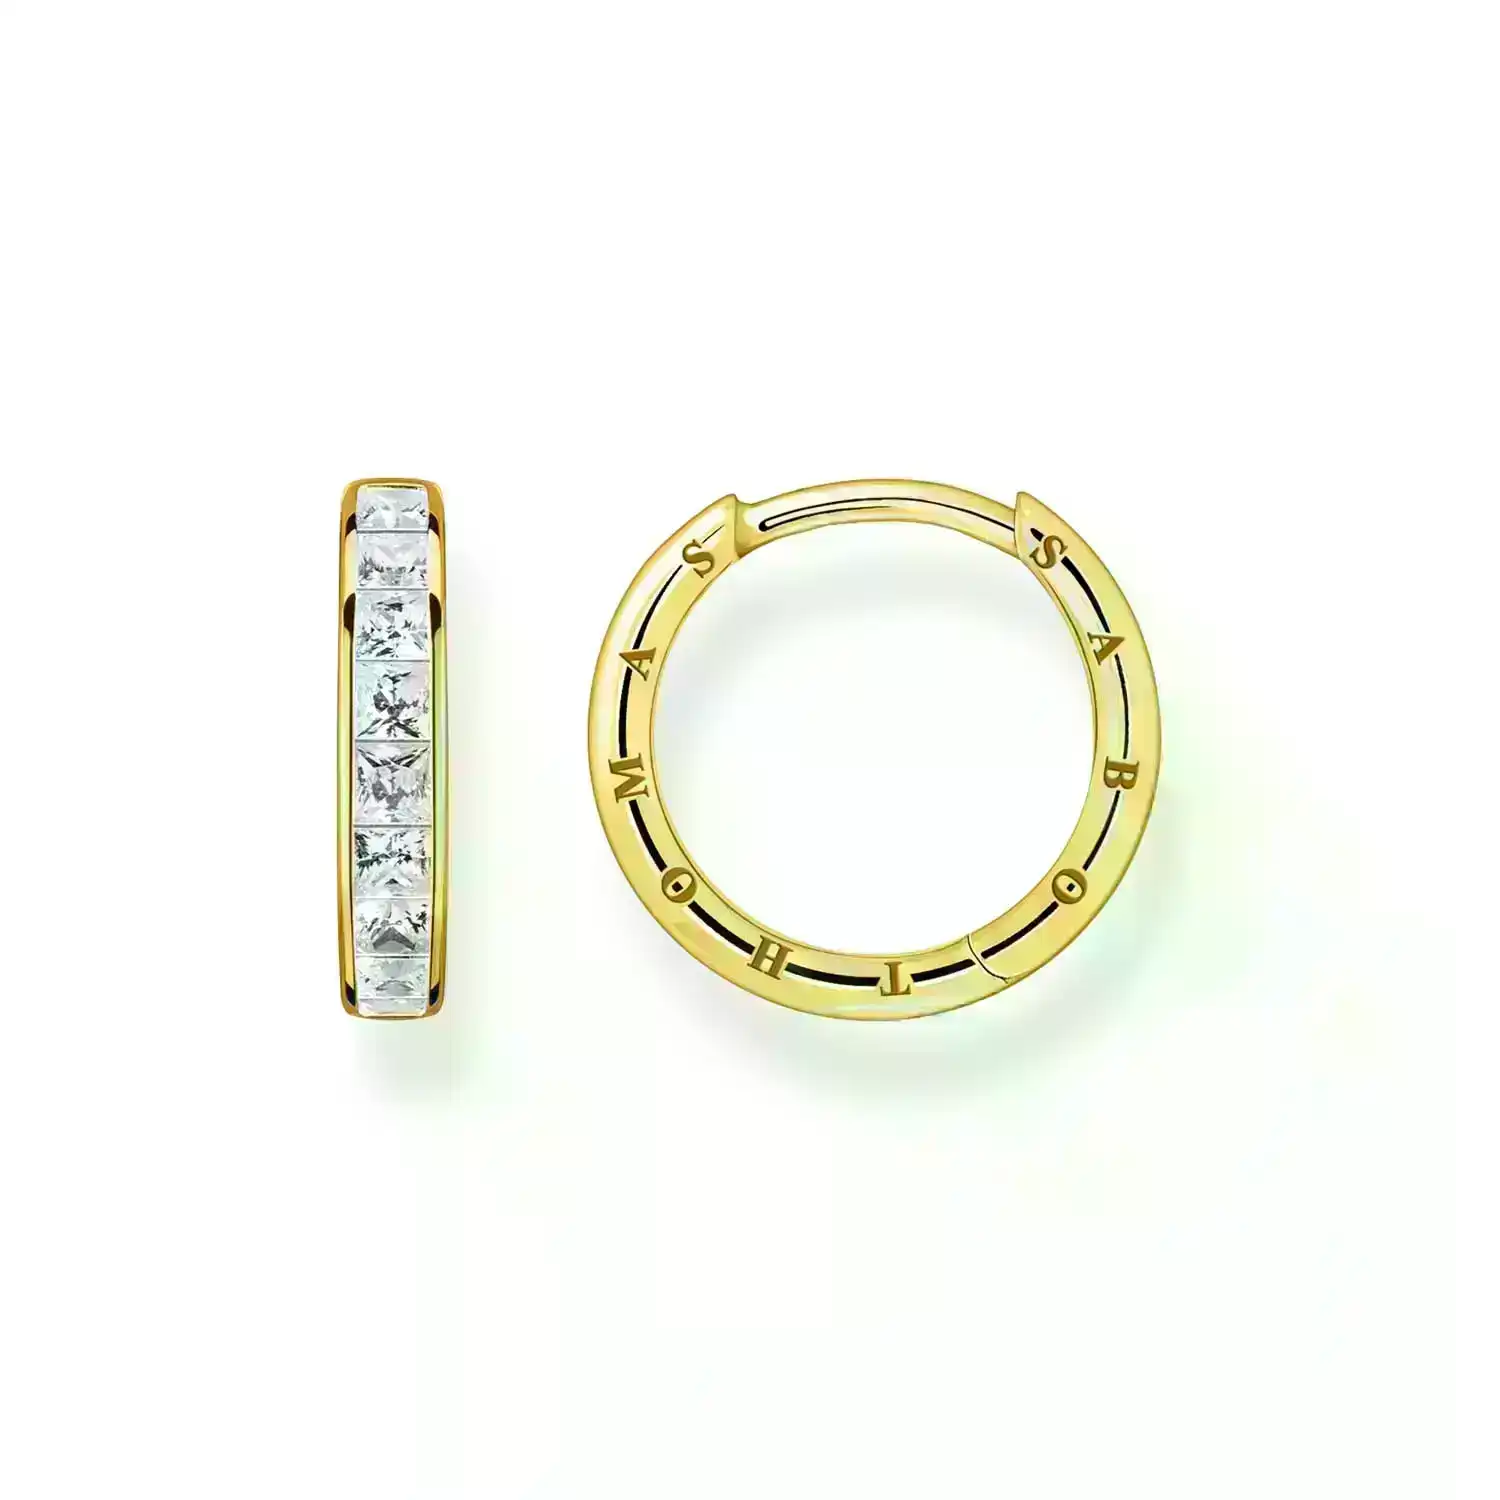 Thomas Sabo Heritage Gold Plated Sterling Silver Baguette CZ Hoop Earring